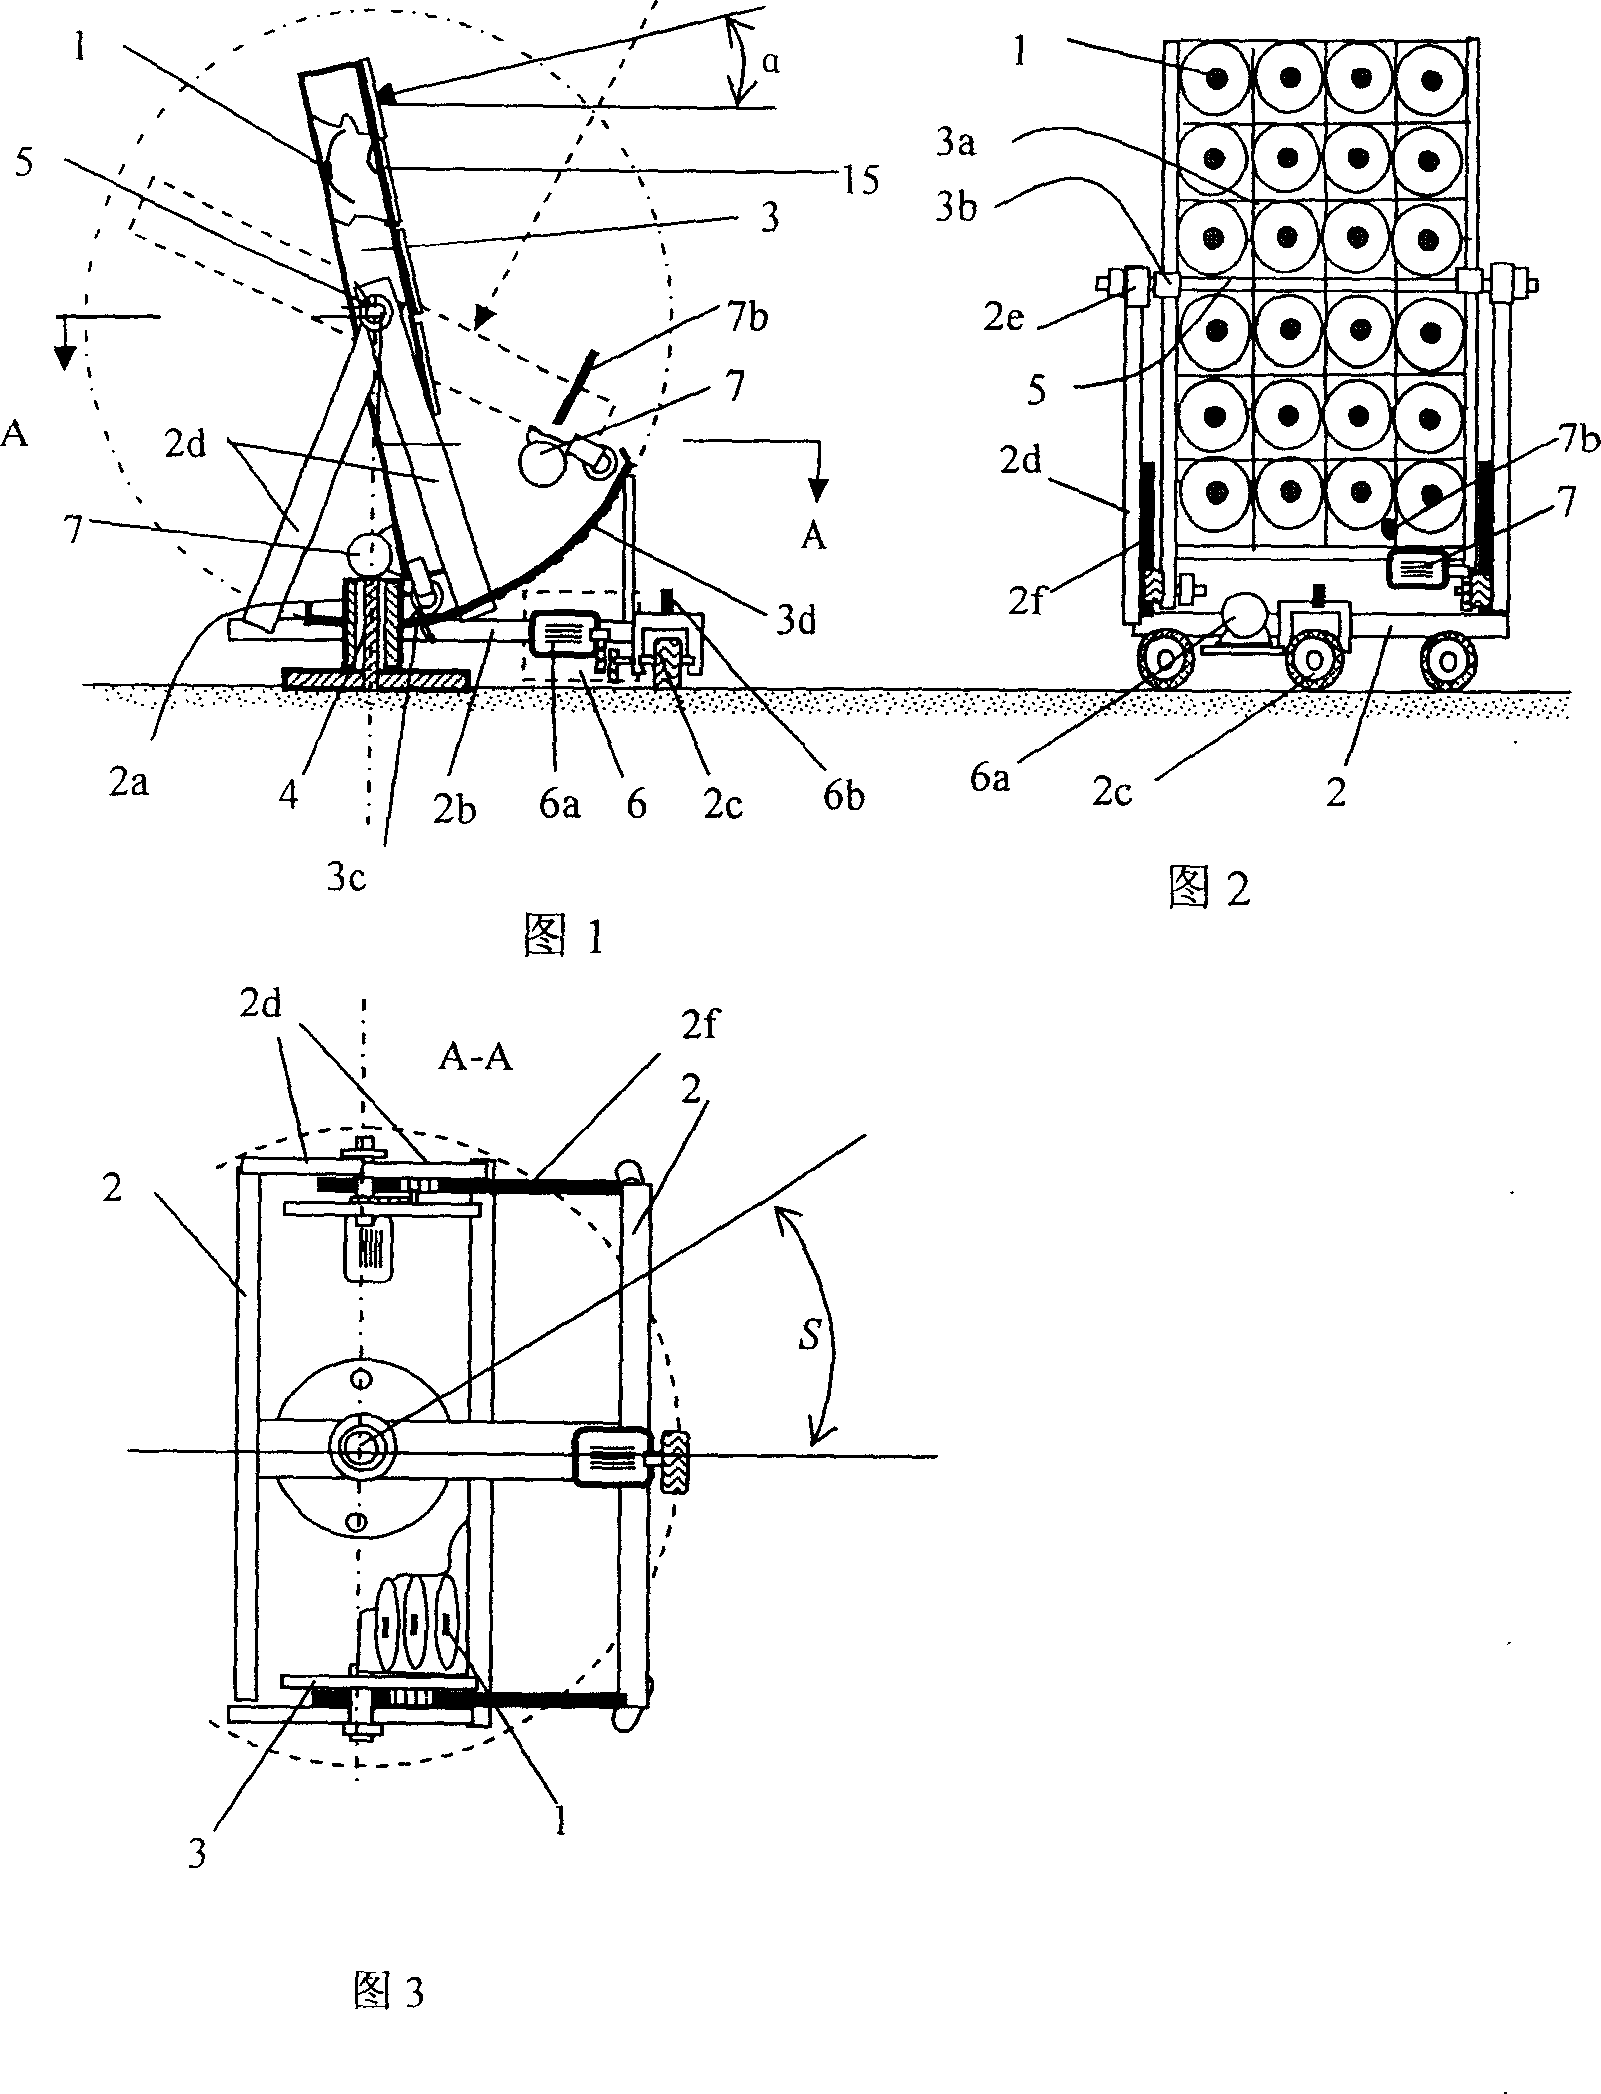 Two-dimensional photovoltaic generator bracket for tracing sun